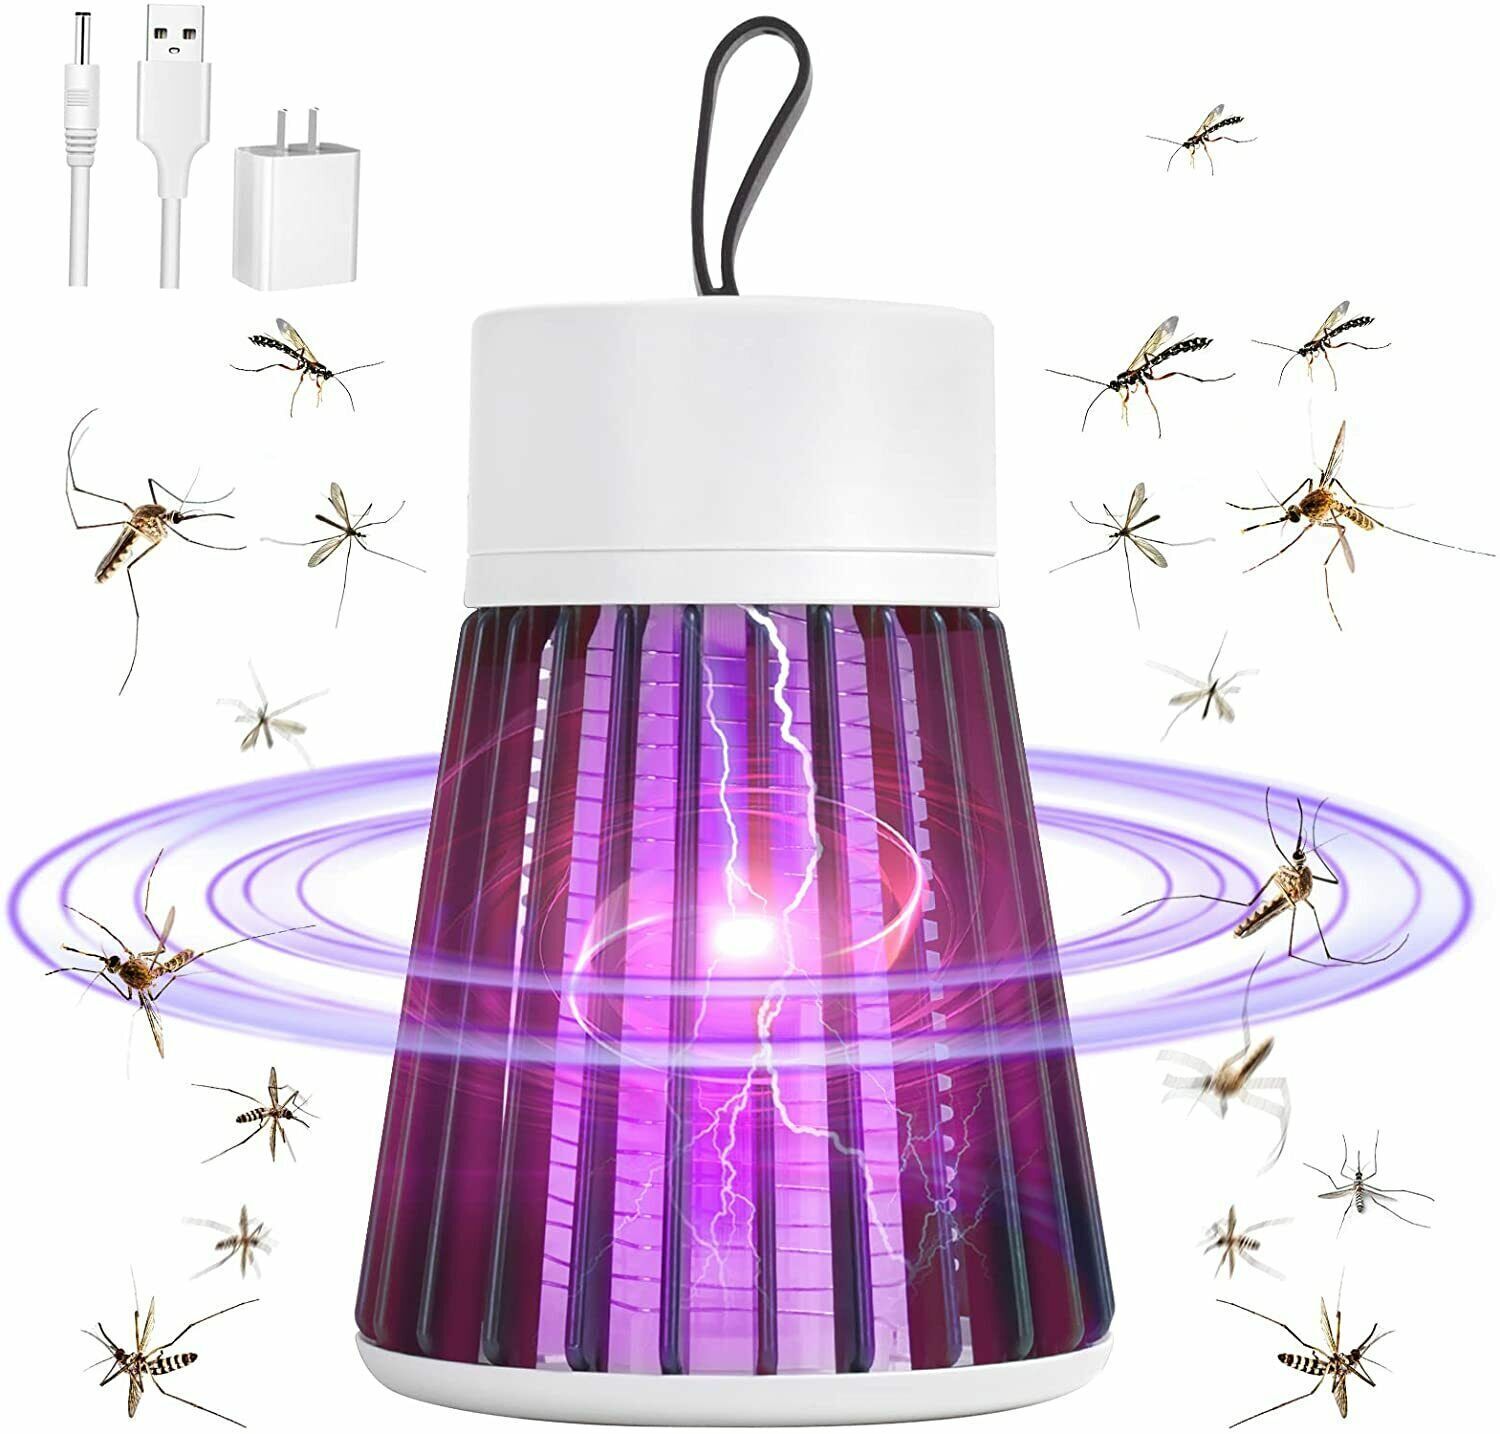 10pc Electric Shock Uv Mosquito Killer Lamp Fly Bug Zapper Insect Repellent Trap